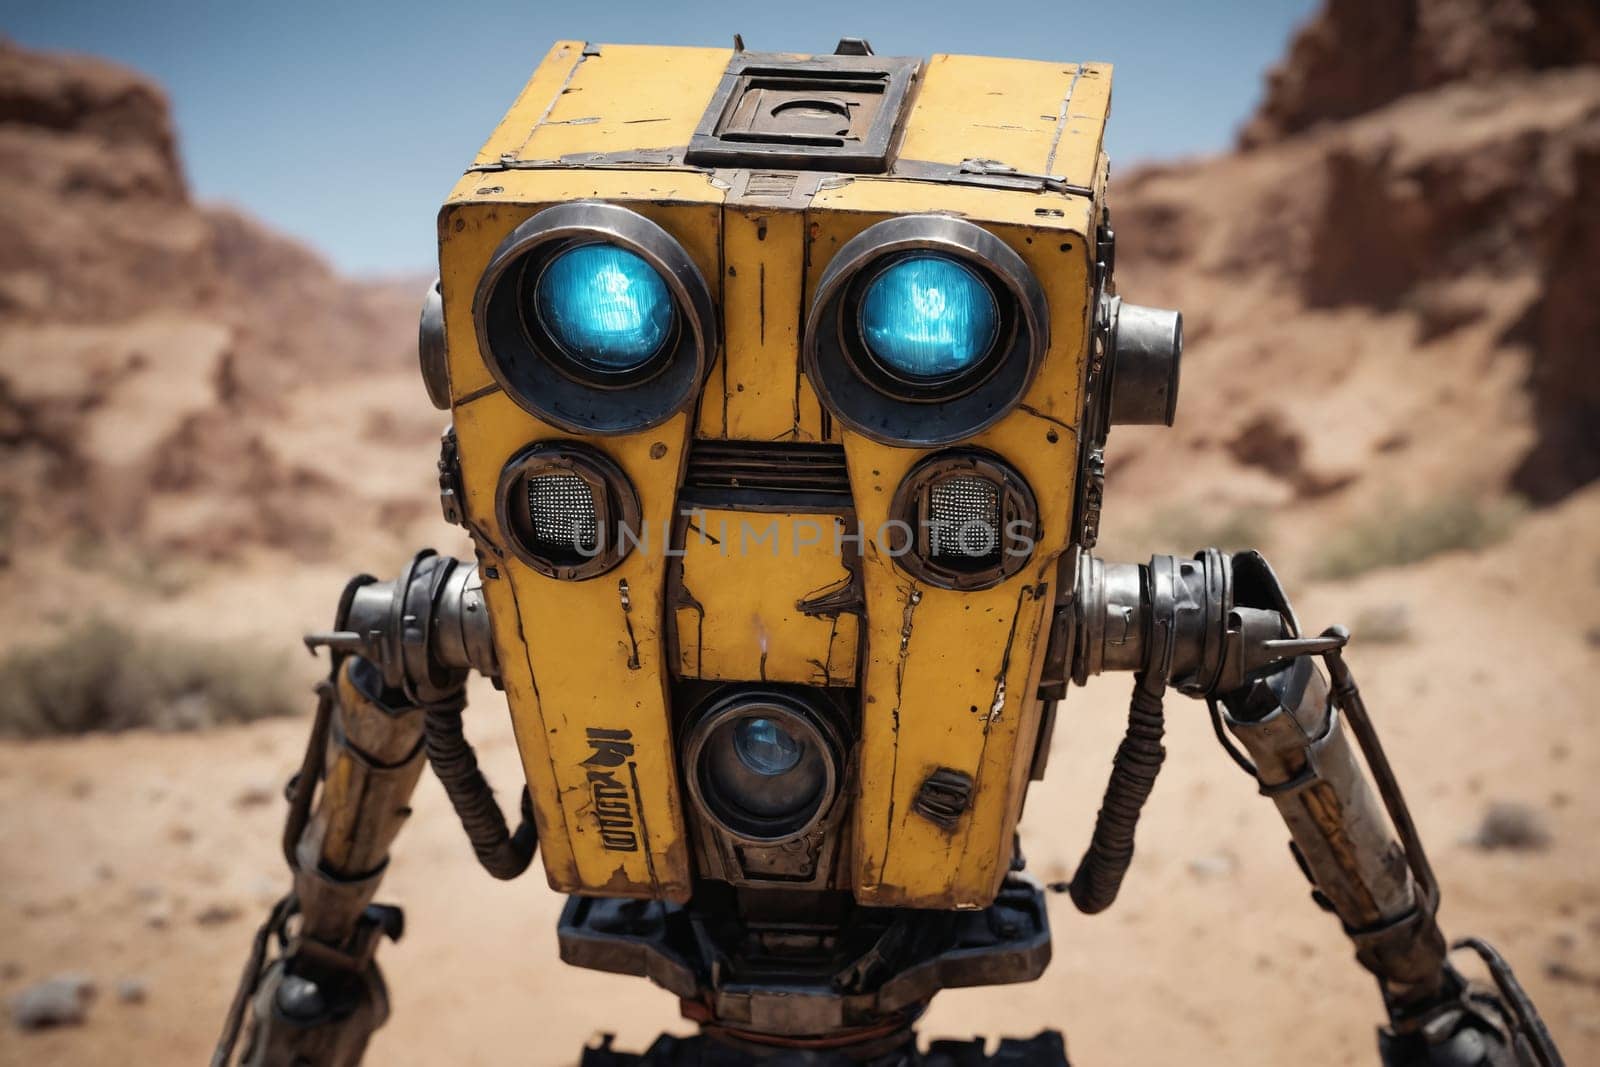 A Glimpse into the Future: Humanoid Robot Exploring the Desert by Andre1ns